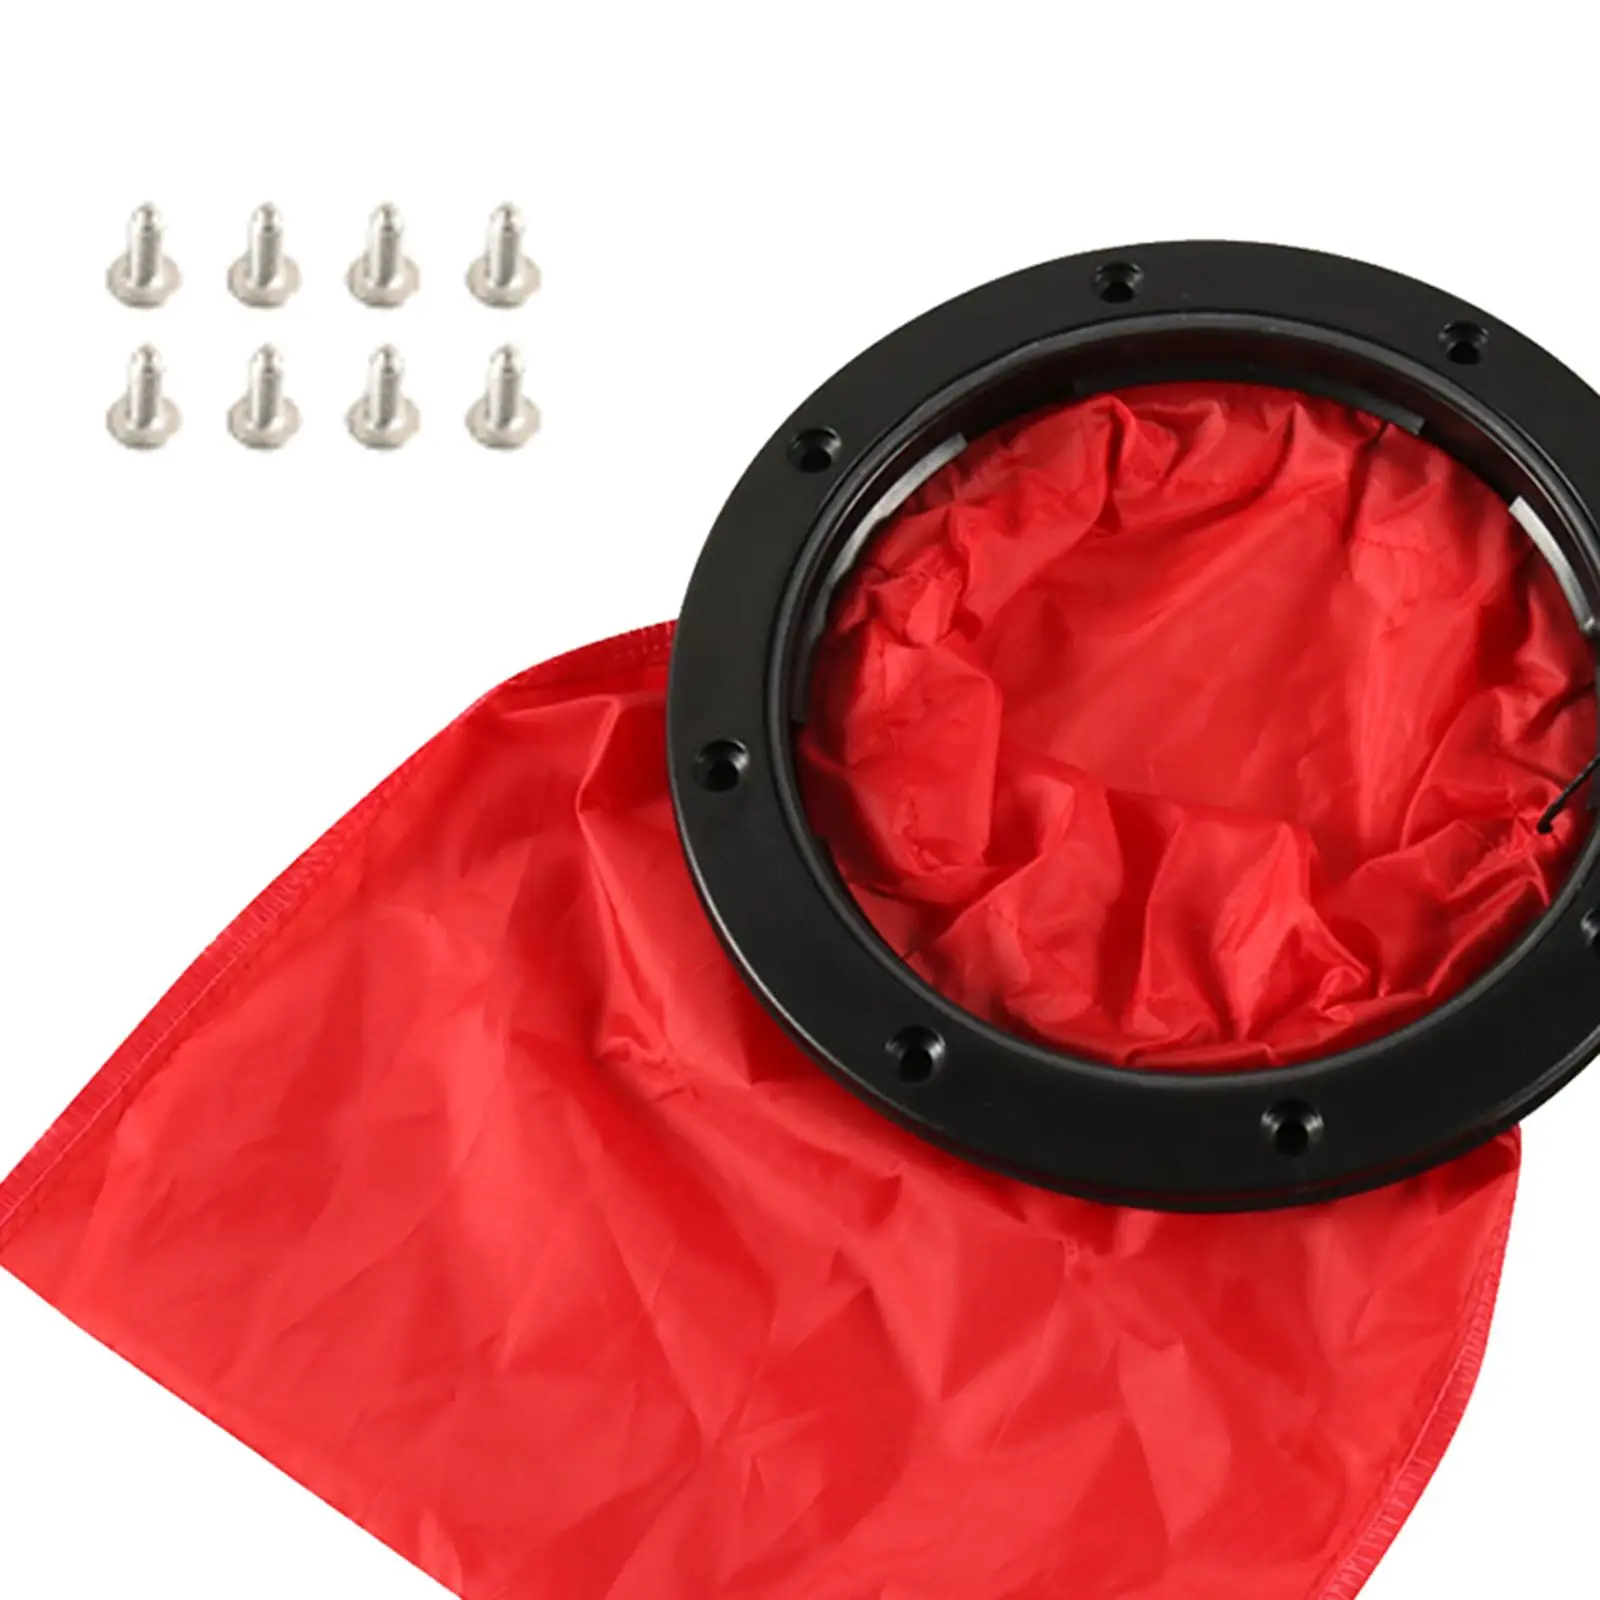 kayak Round Cover 6in Convenient to Install Durable with Storage Bag Accessories Kayak es Cover for Rigging Fishing